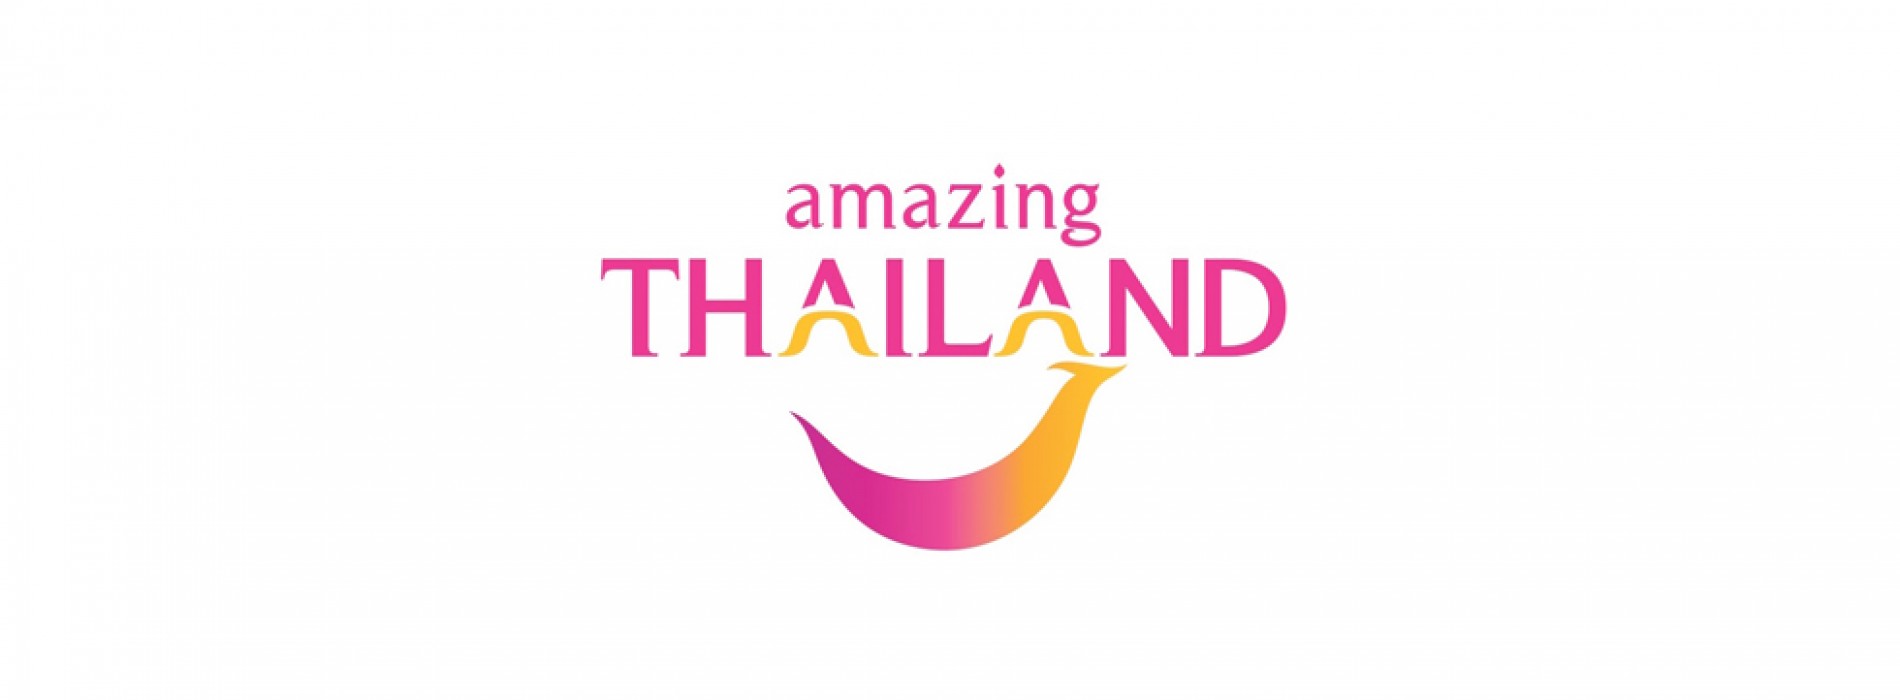 Thailand tourism generates 840 billion Baht in first four months of 2017